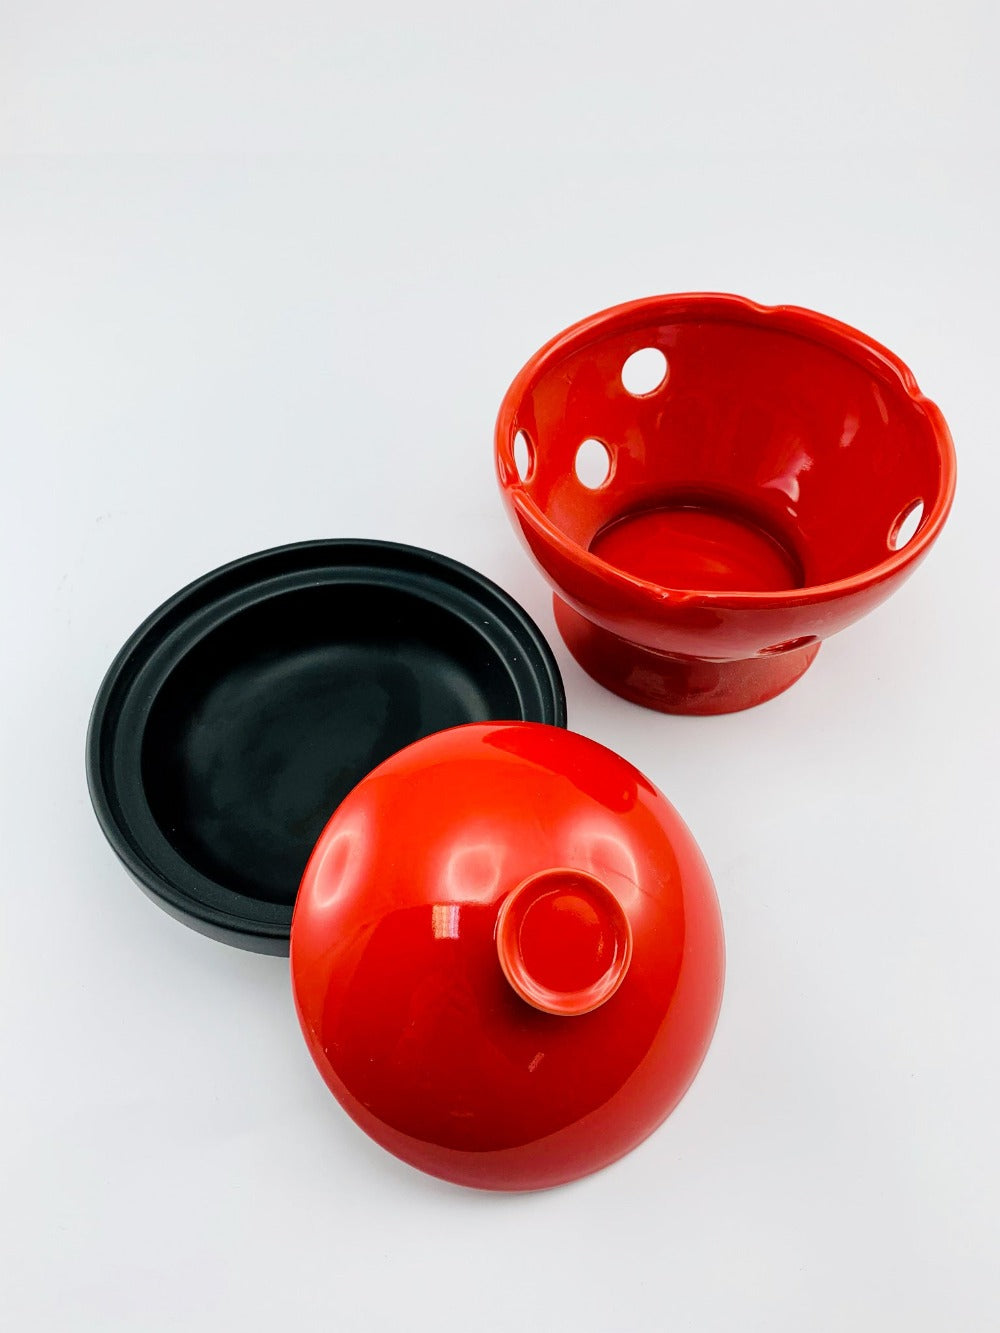 Mini Hot Clay Pot - Red - Gifts by Art Tree